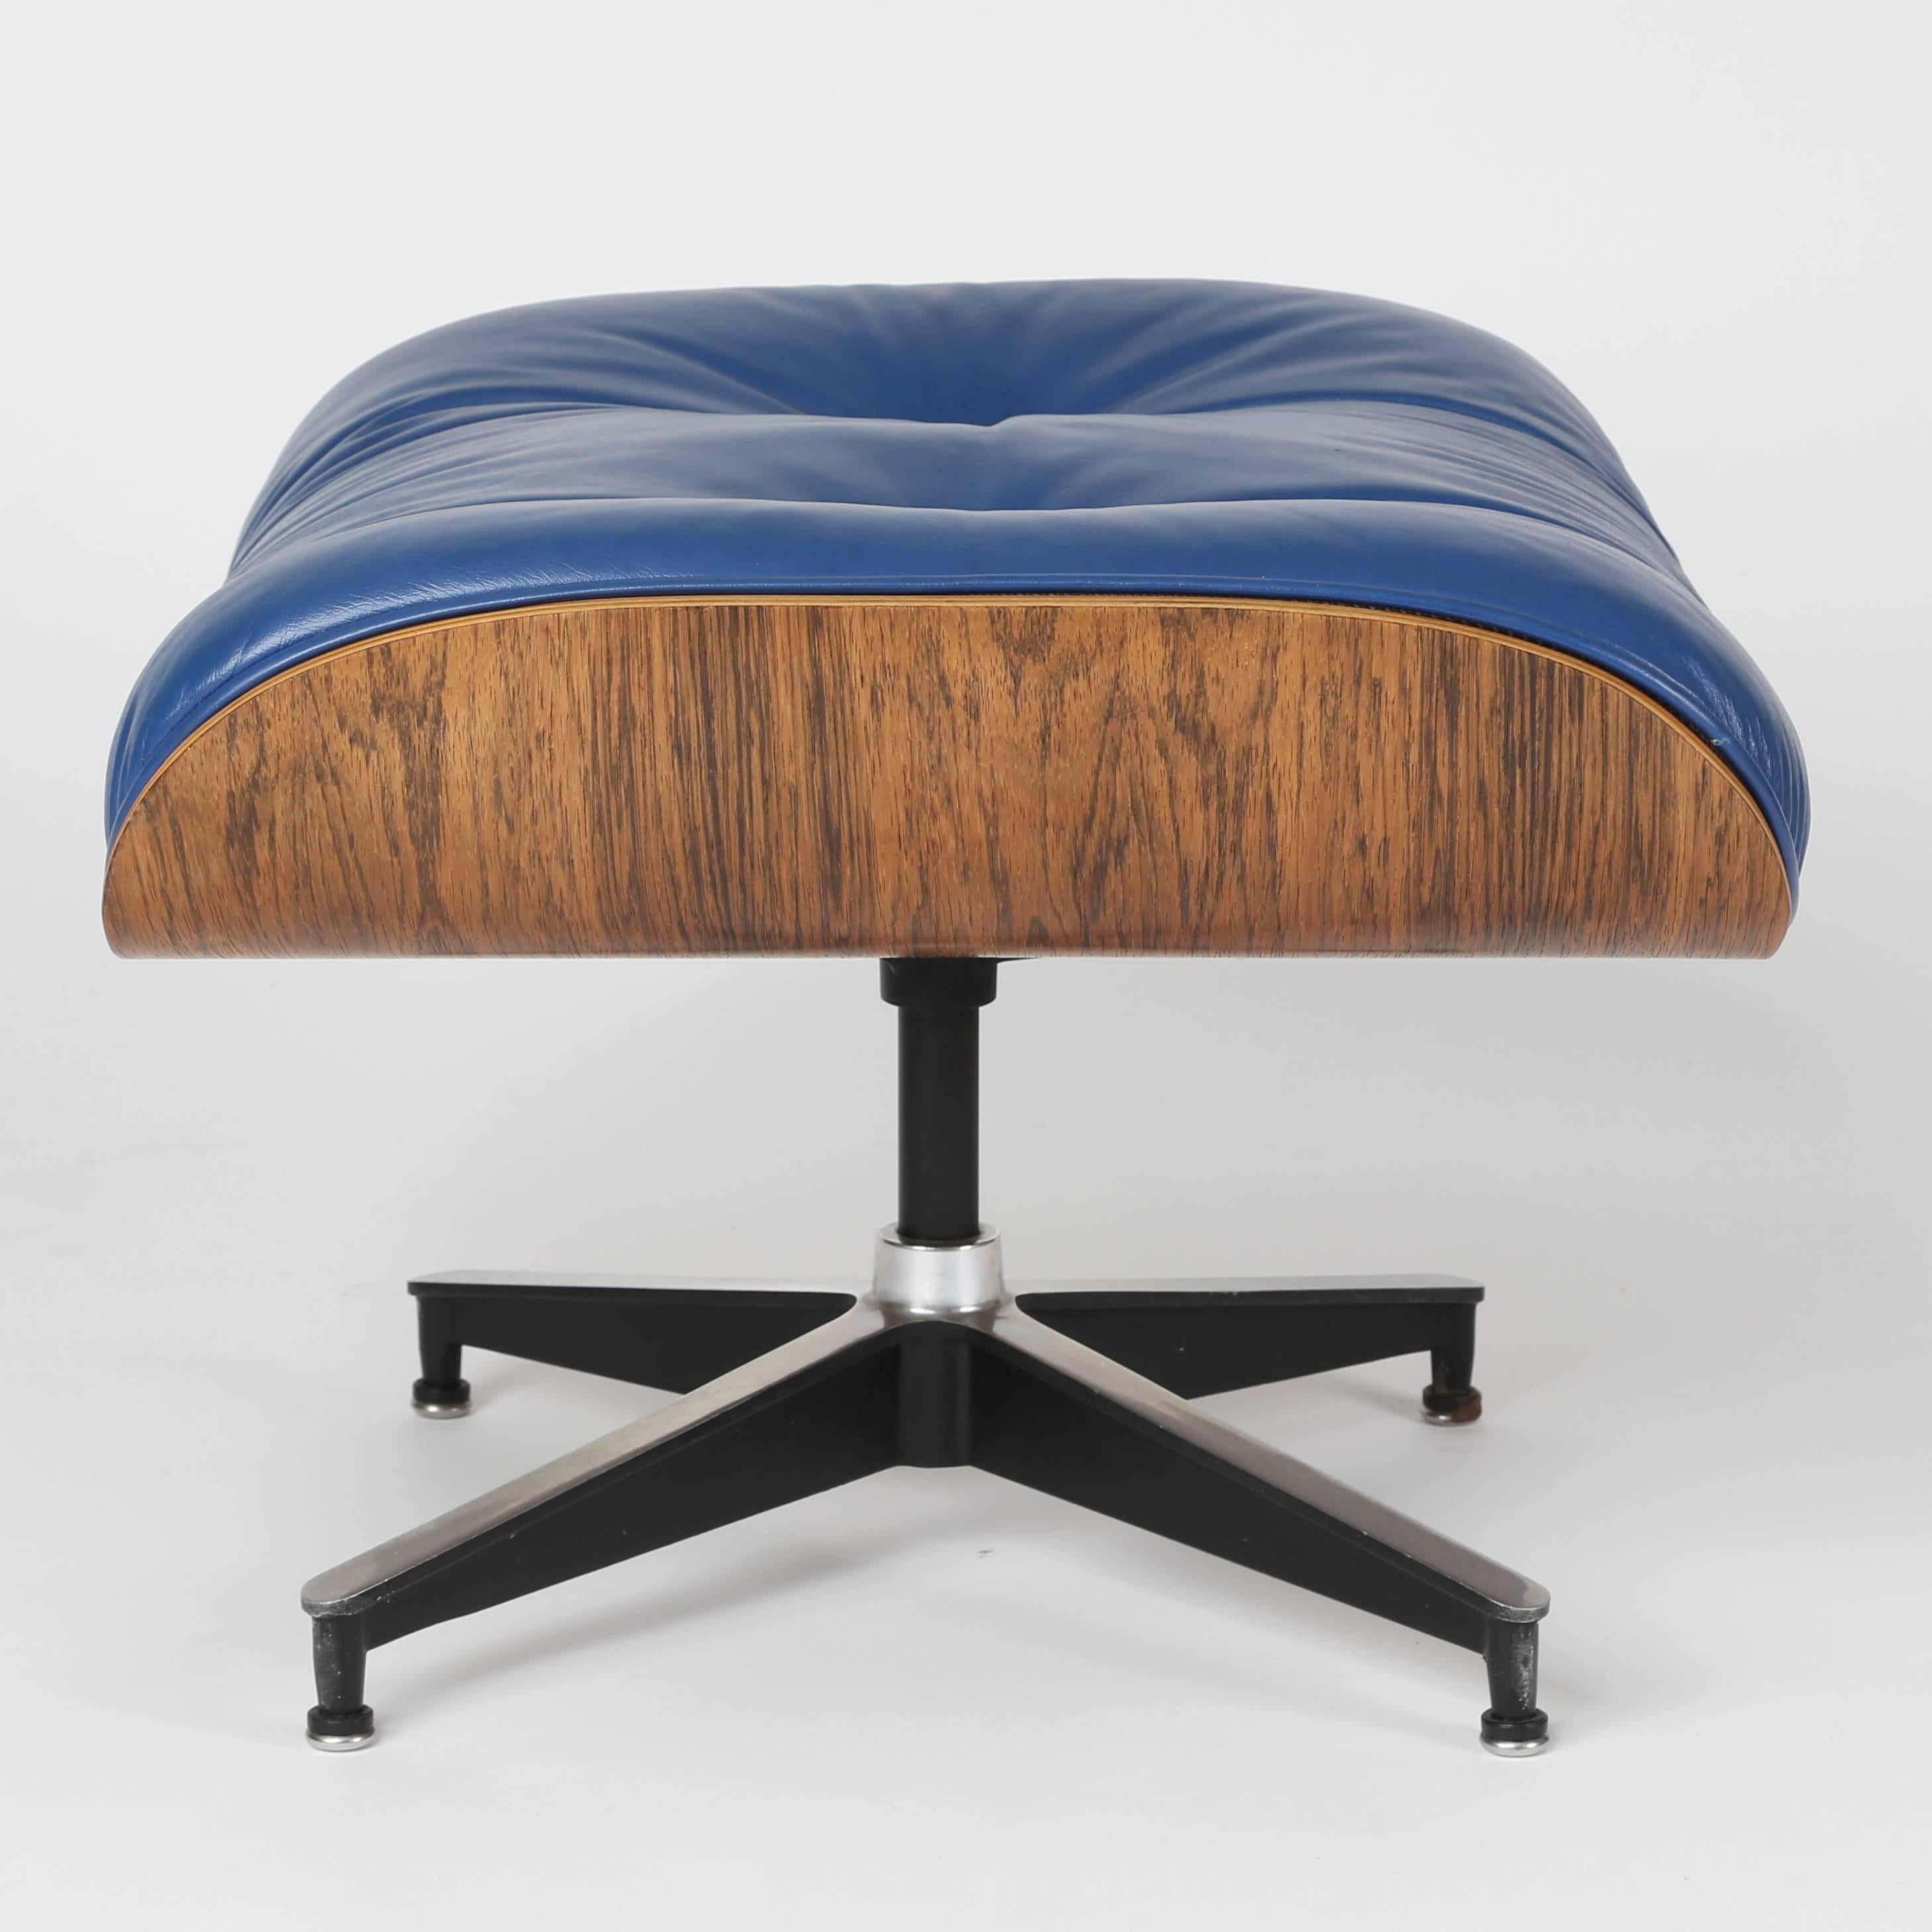 Mid-20th Century Vintage 670-671 Eames Rosewood Lounge Chair and Ottoman in Blue Leather